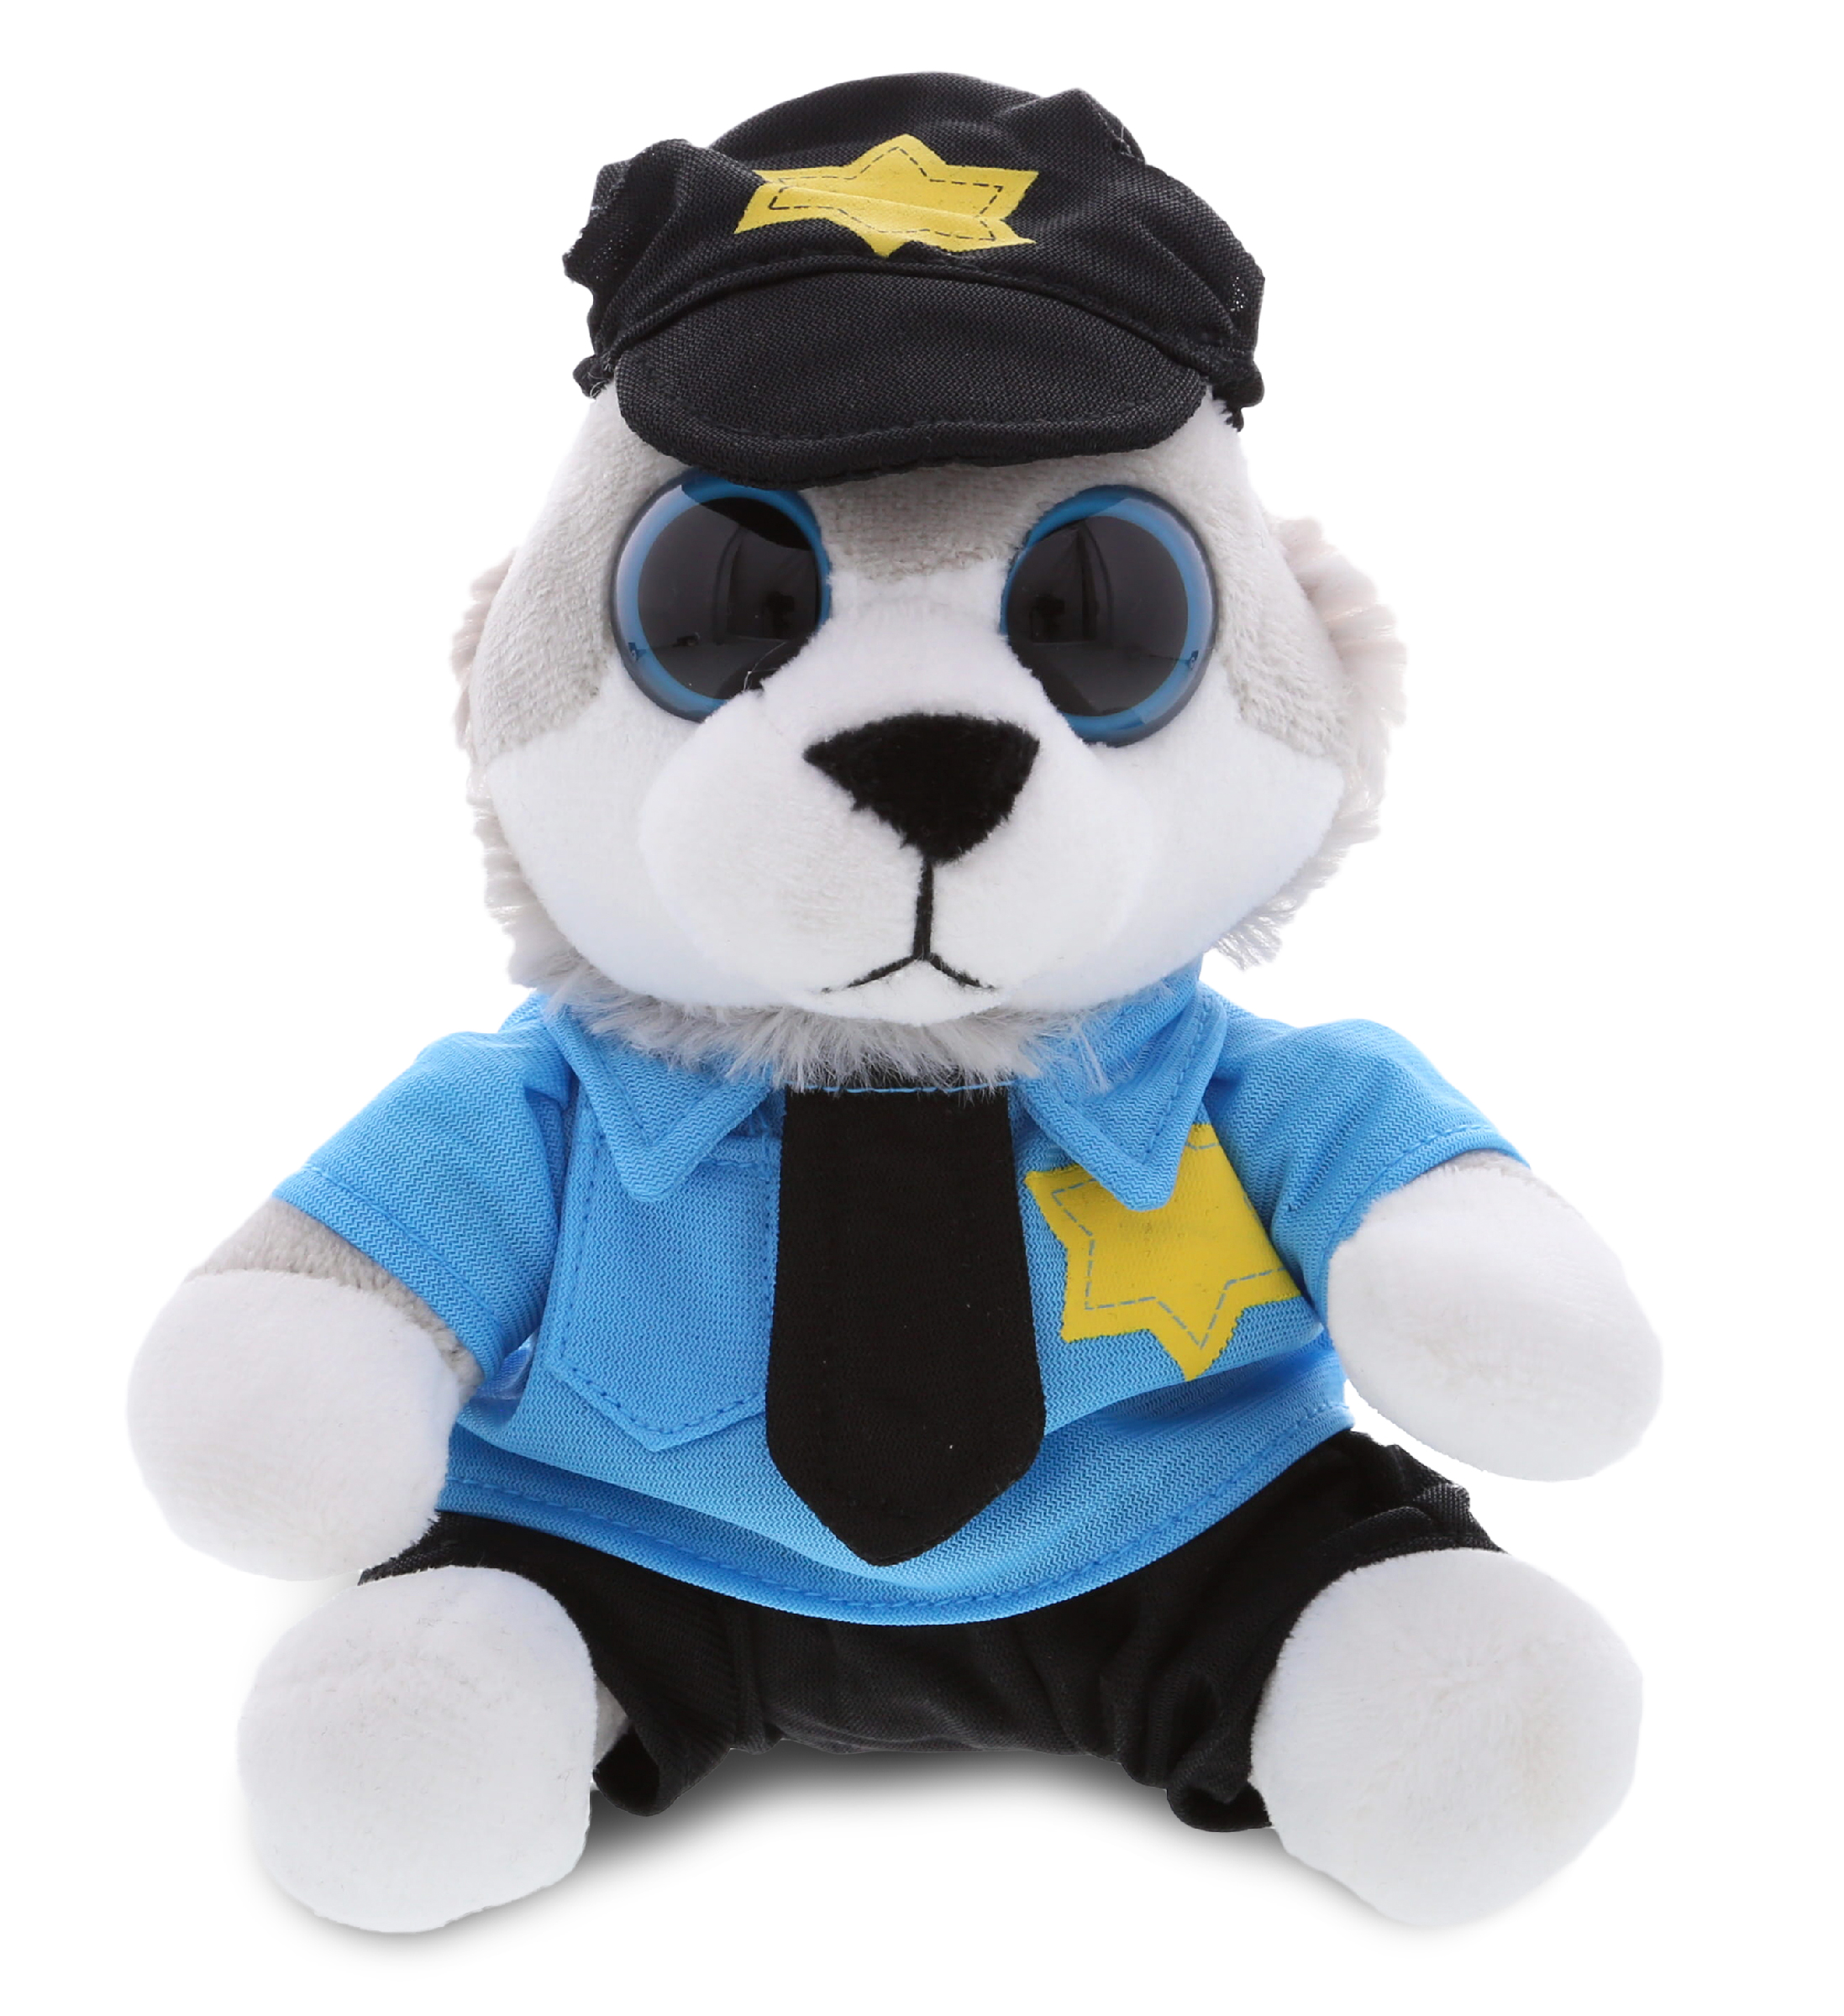 DolliBu Big Eye Wolf Police Officer Plush Toy – Super Soft Wolf Cop Stuffed  Animal Dress Up with Cute Cop Uniform & Cap Outfit – 6″ Inches - DolliBu